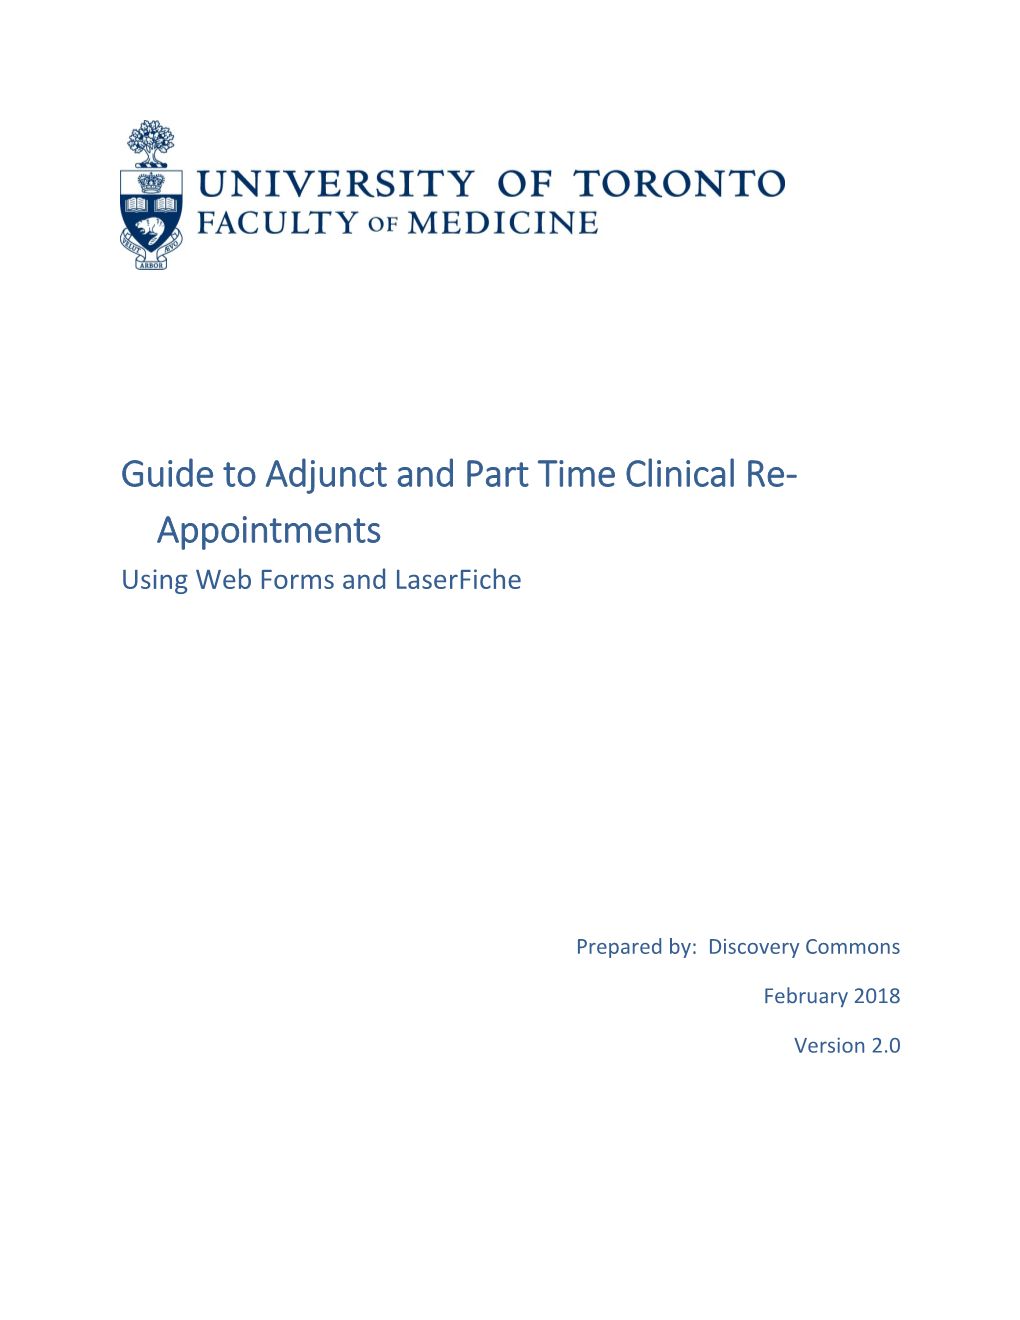 Guide to Adjunct and Part Time Clinical Re-Appointments